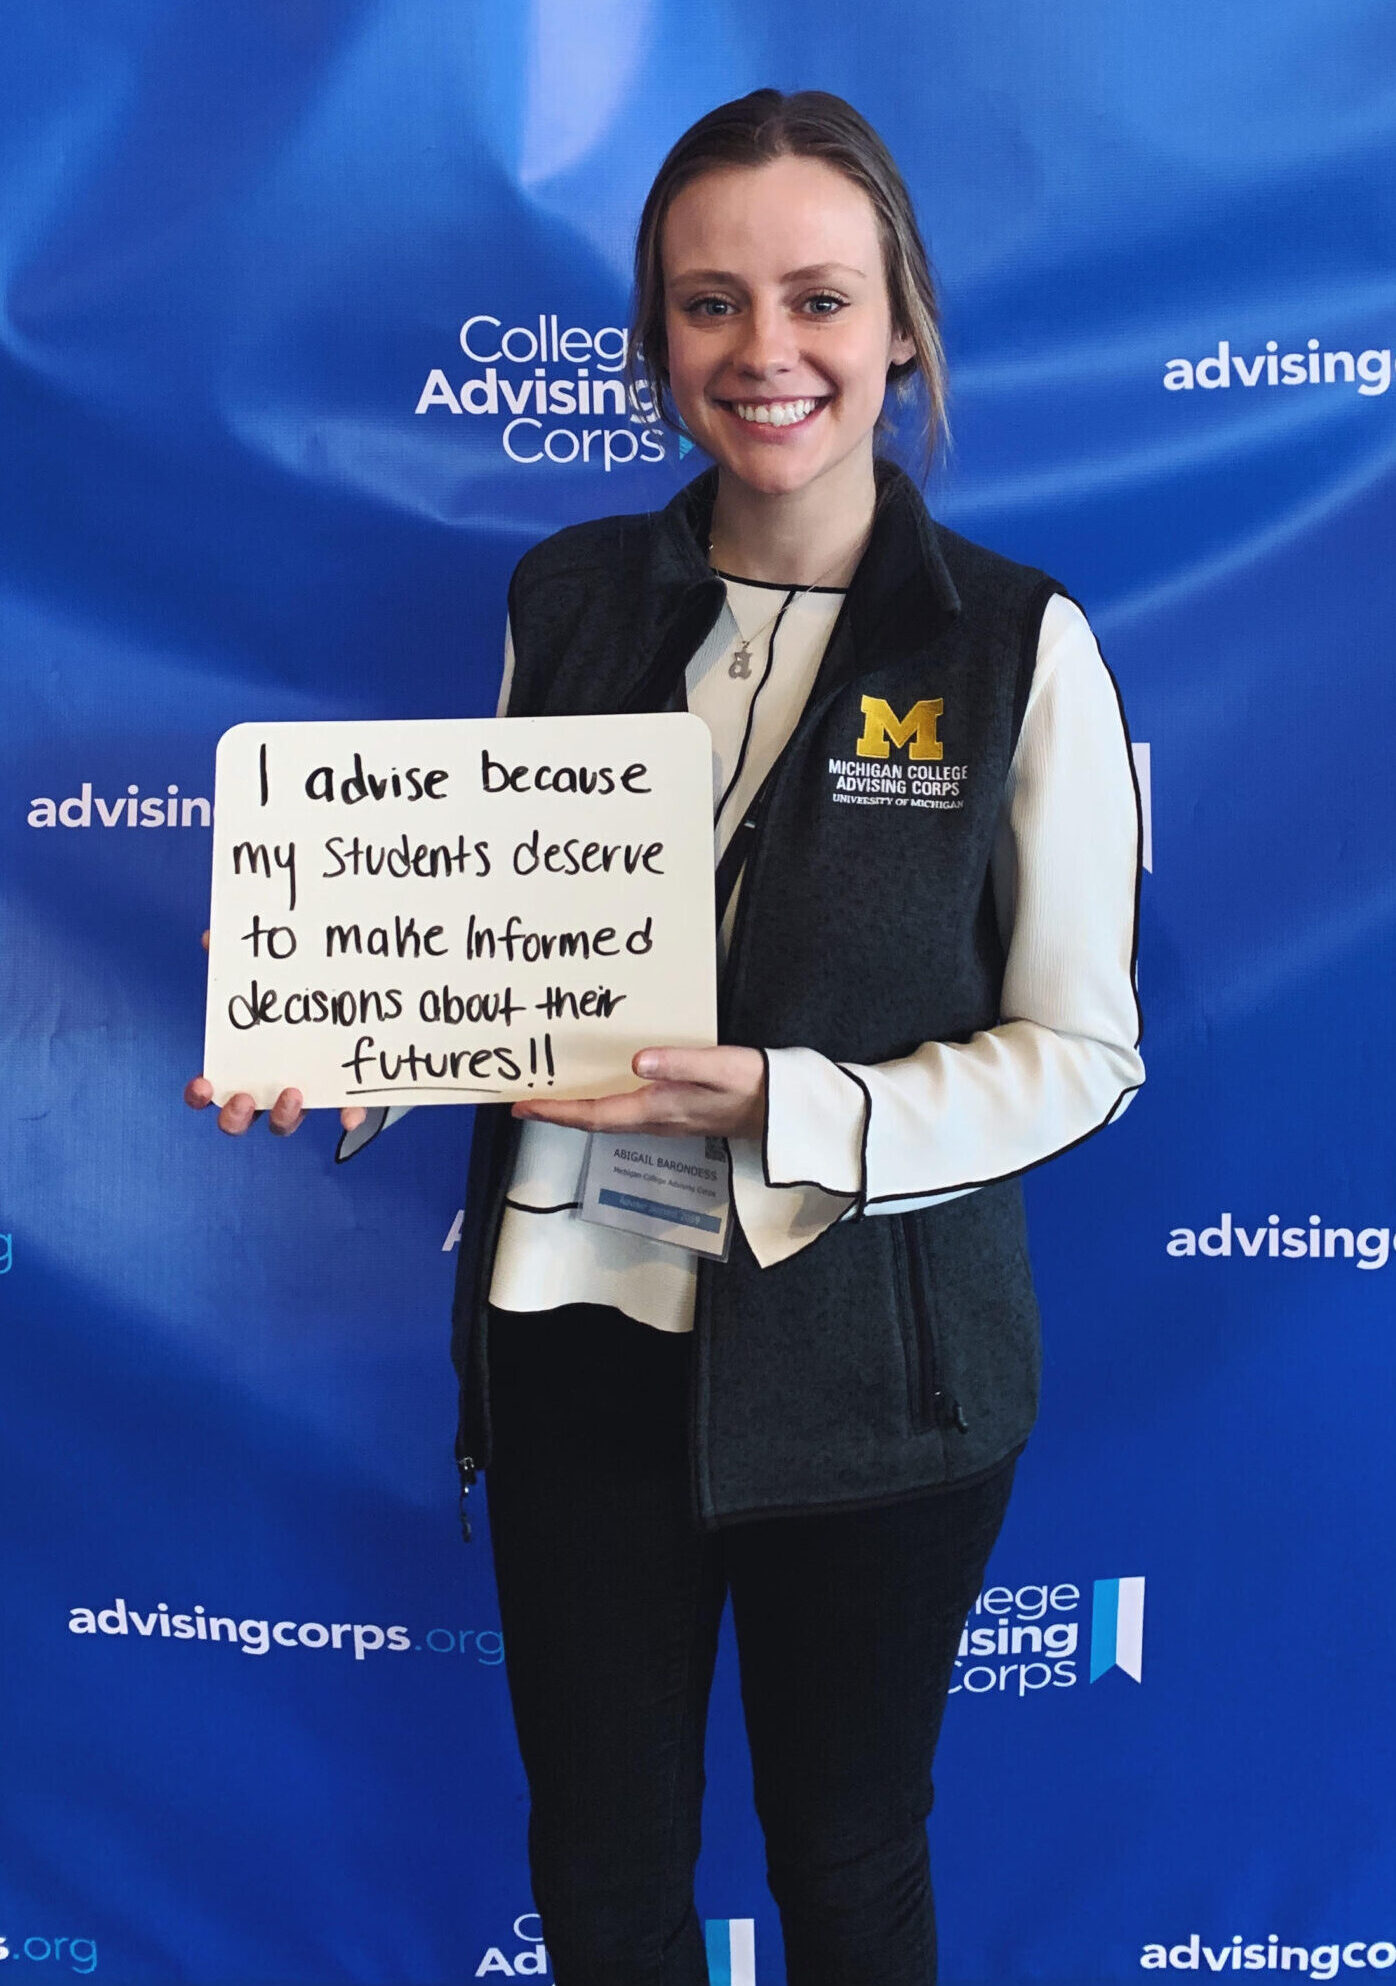 Abigail poses at an event with a handwritten sign that says "I advise because my students deserve to make informed decisions about their futures!"